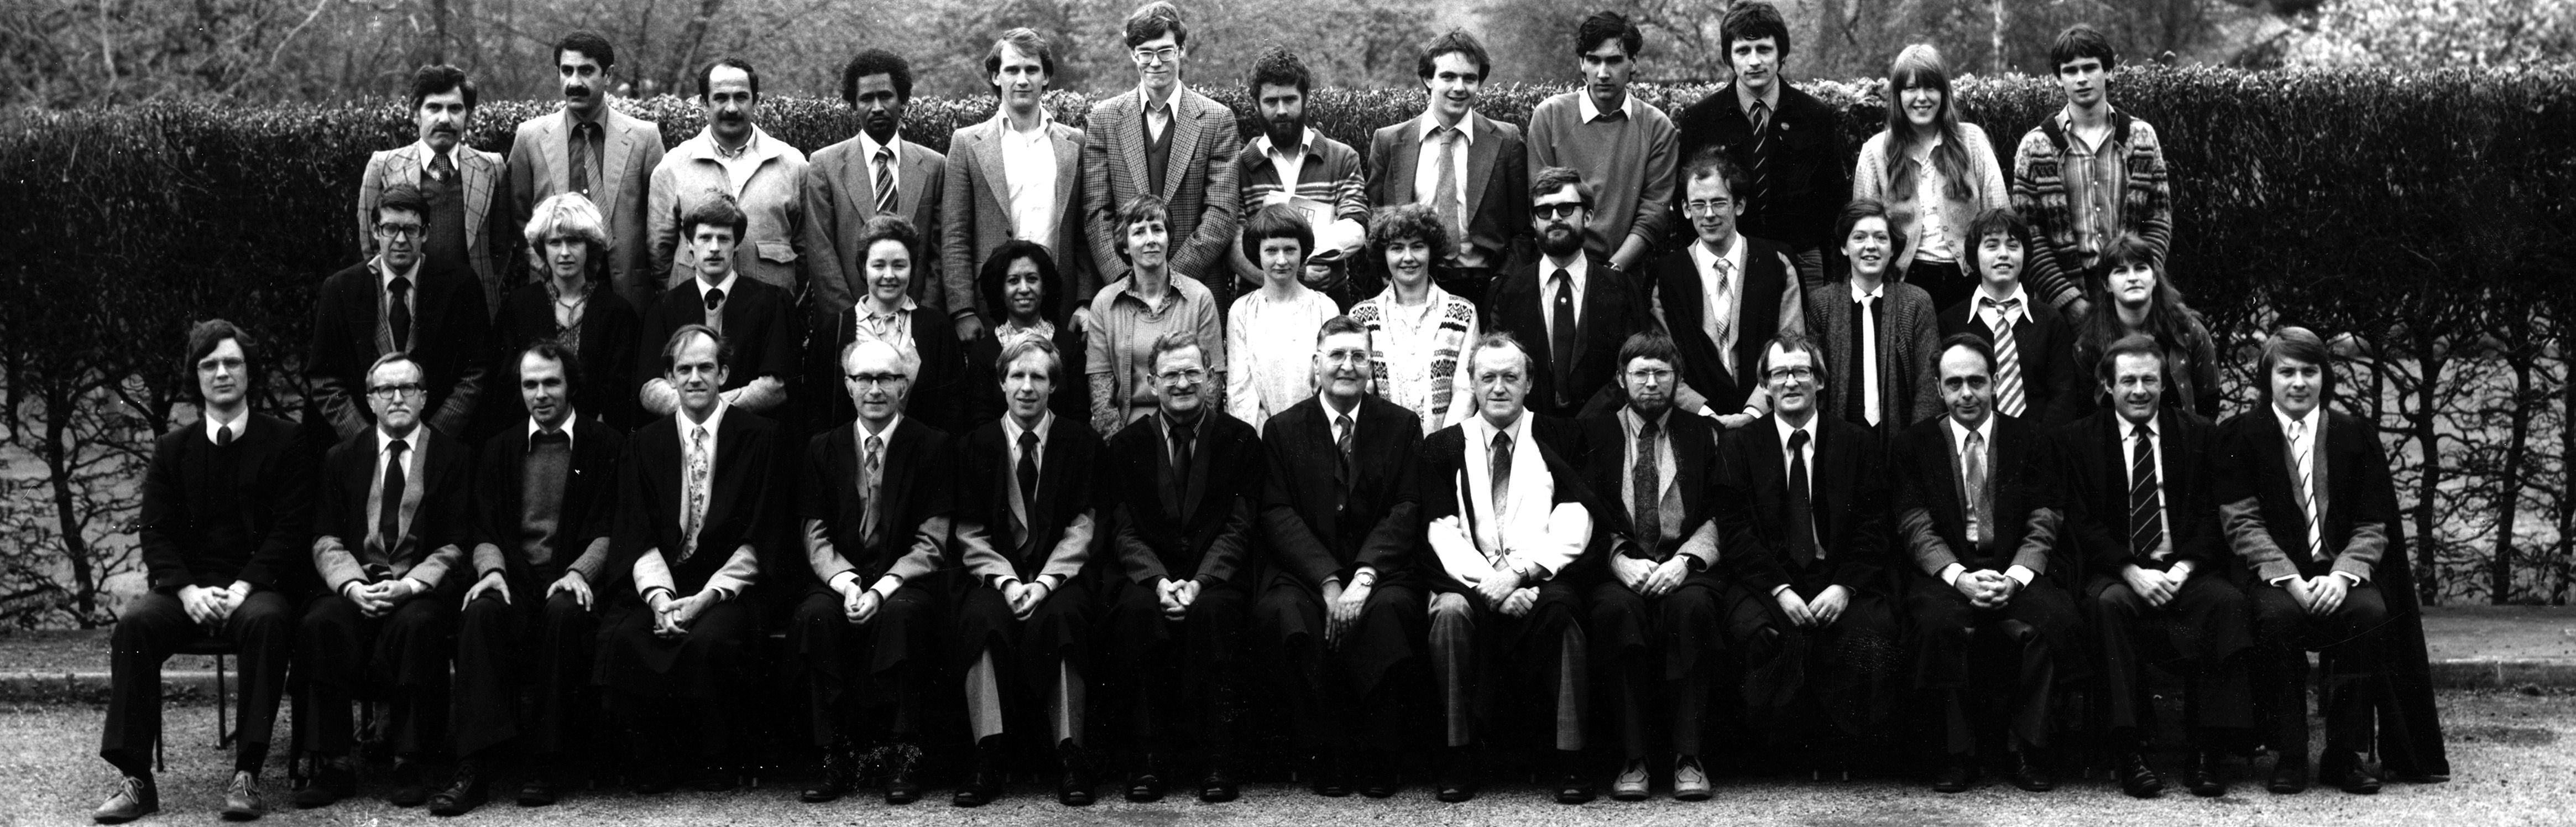 Geography Department Postgraduate Group Photo from 1981